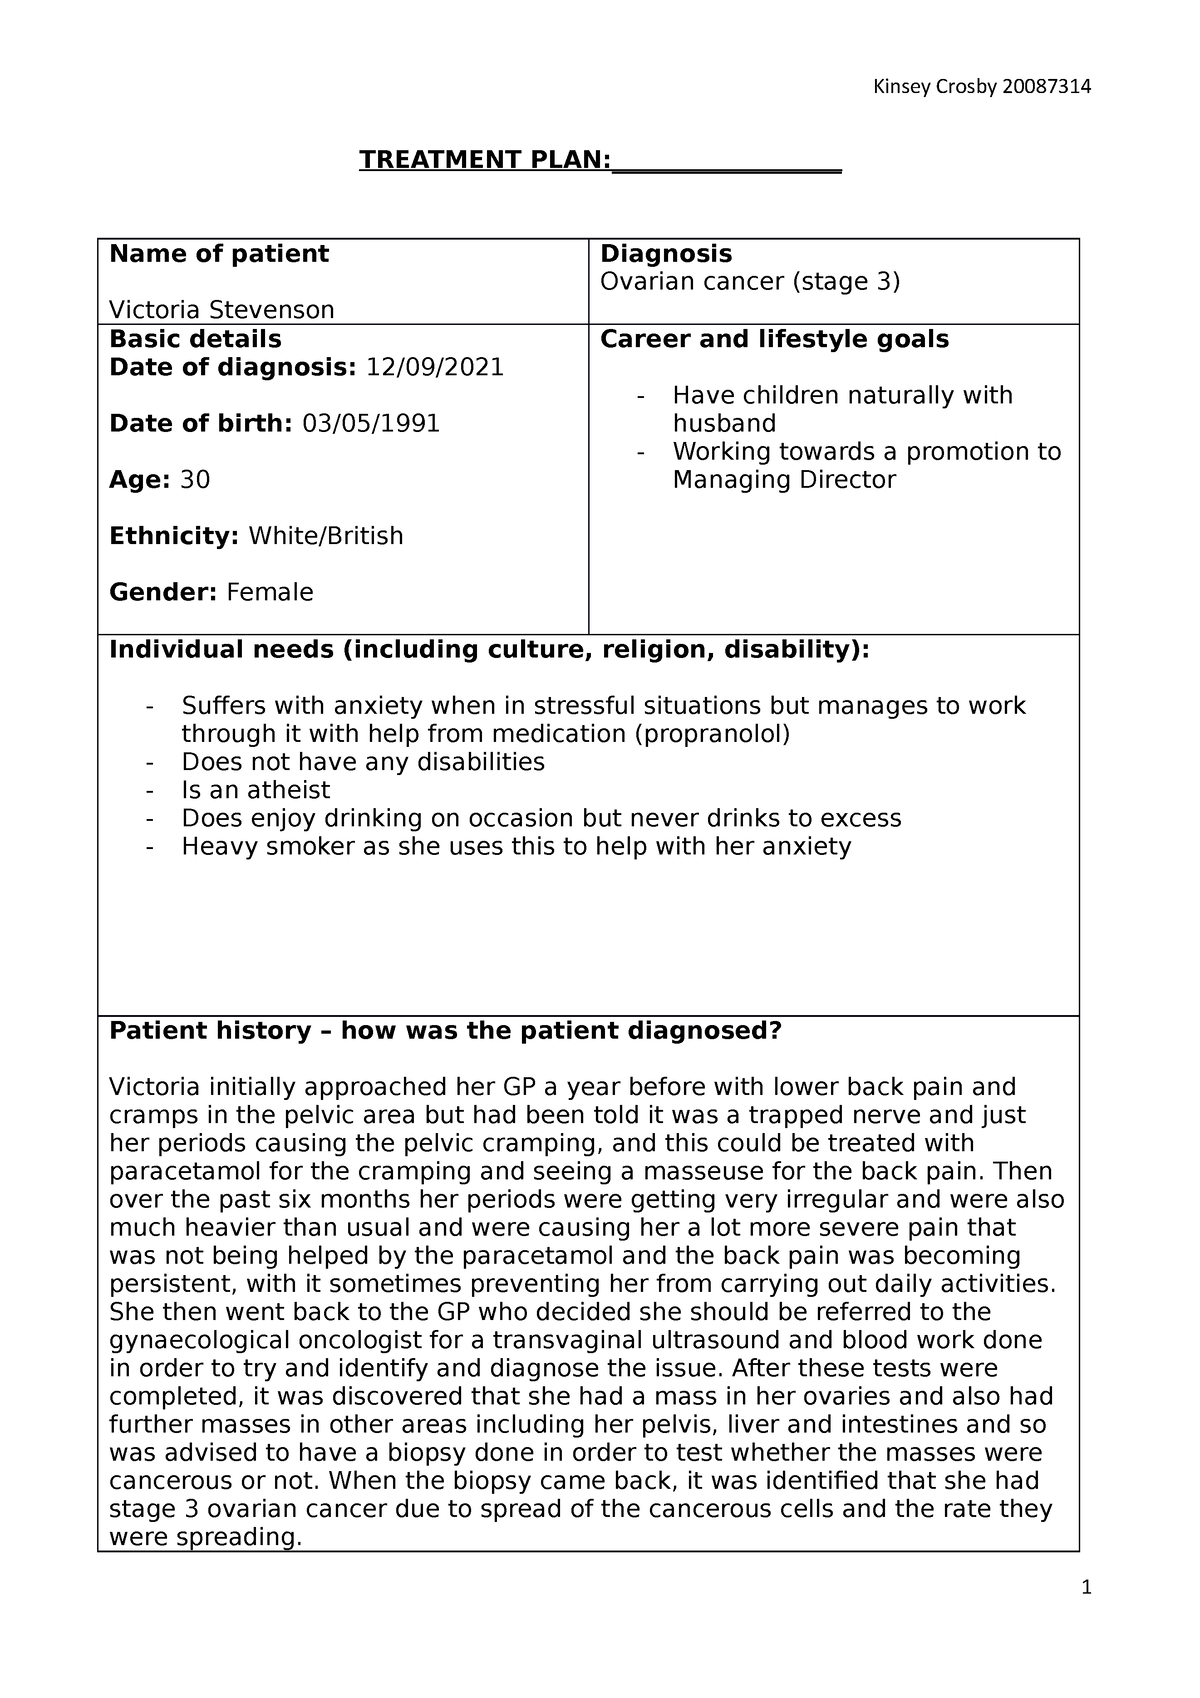 unit 14 assignment health and social care